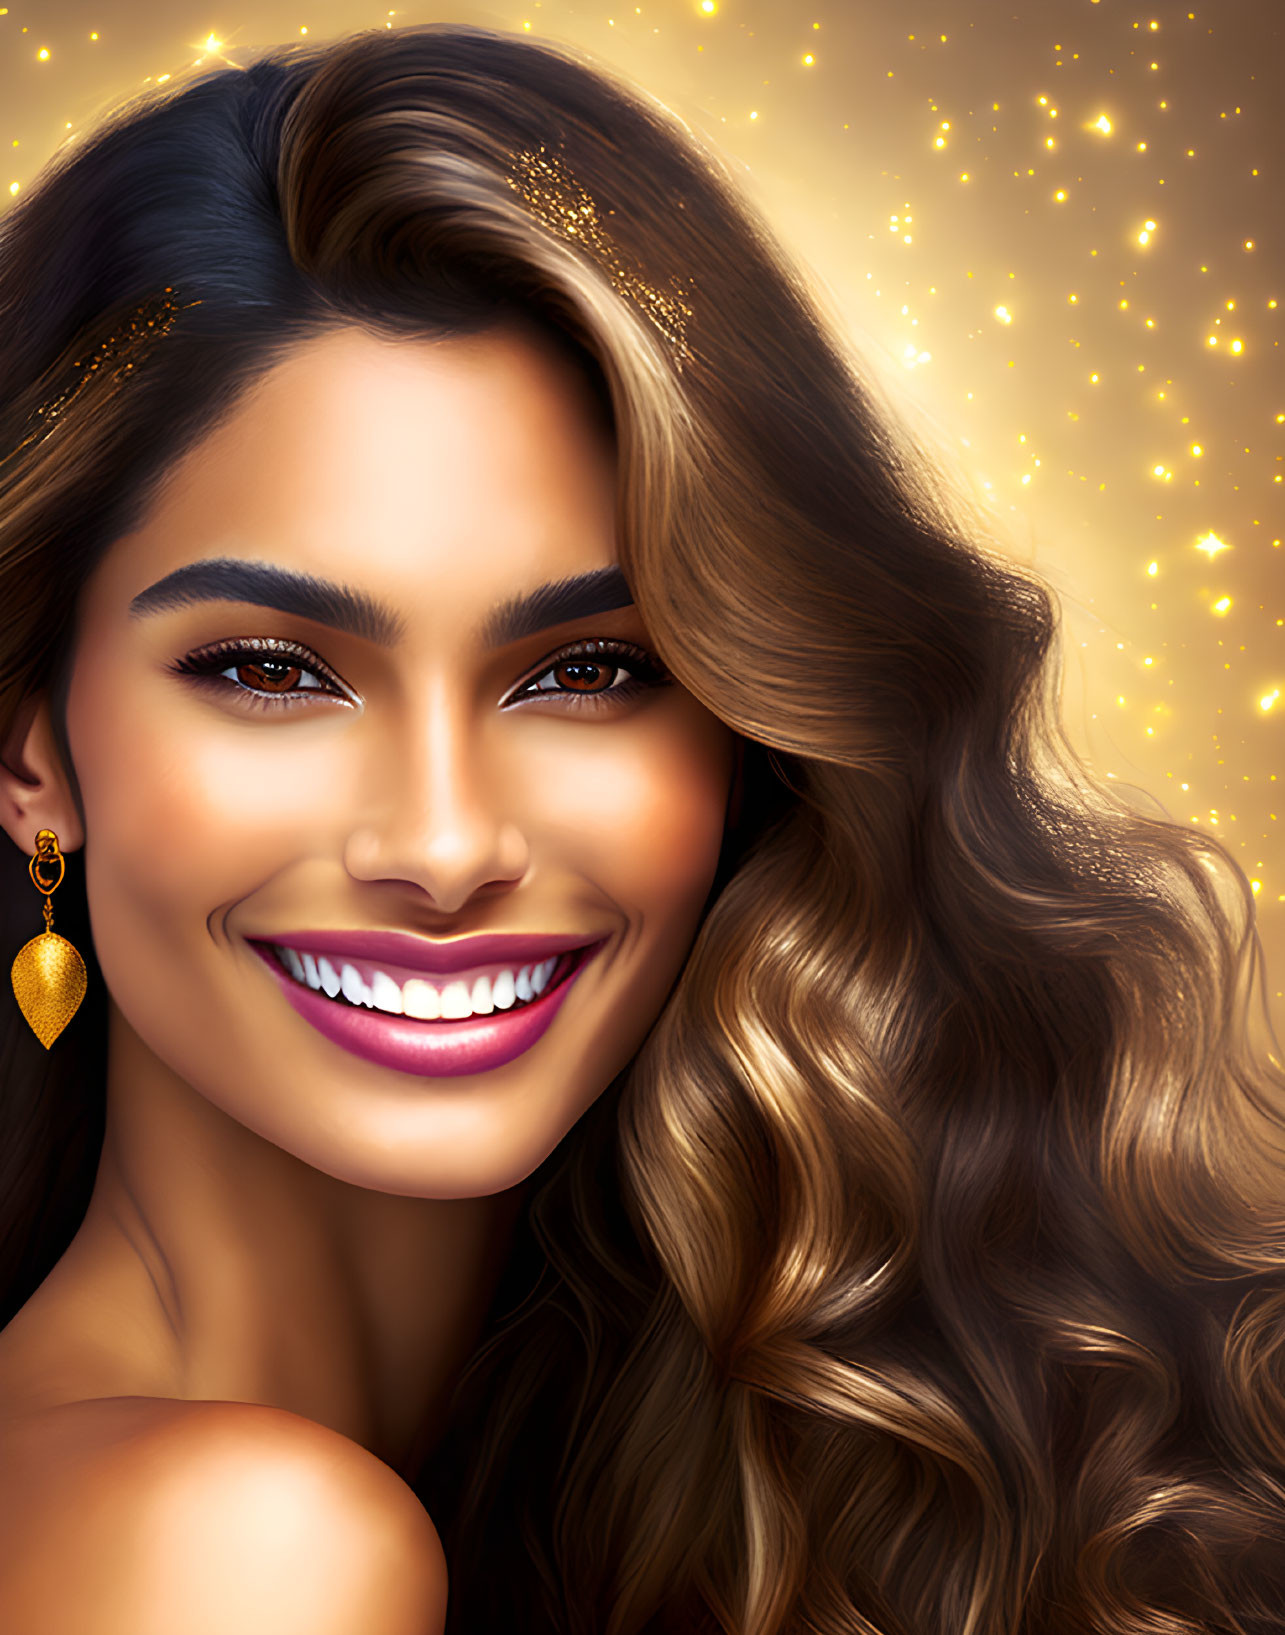 Smiling woman with long wavy hair and gold makeup on golden background